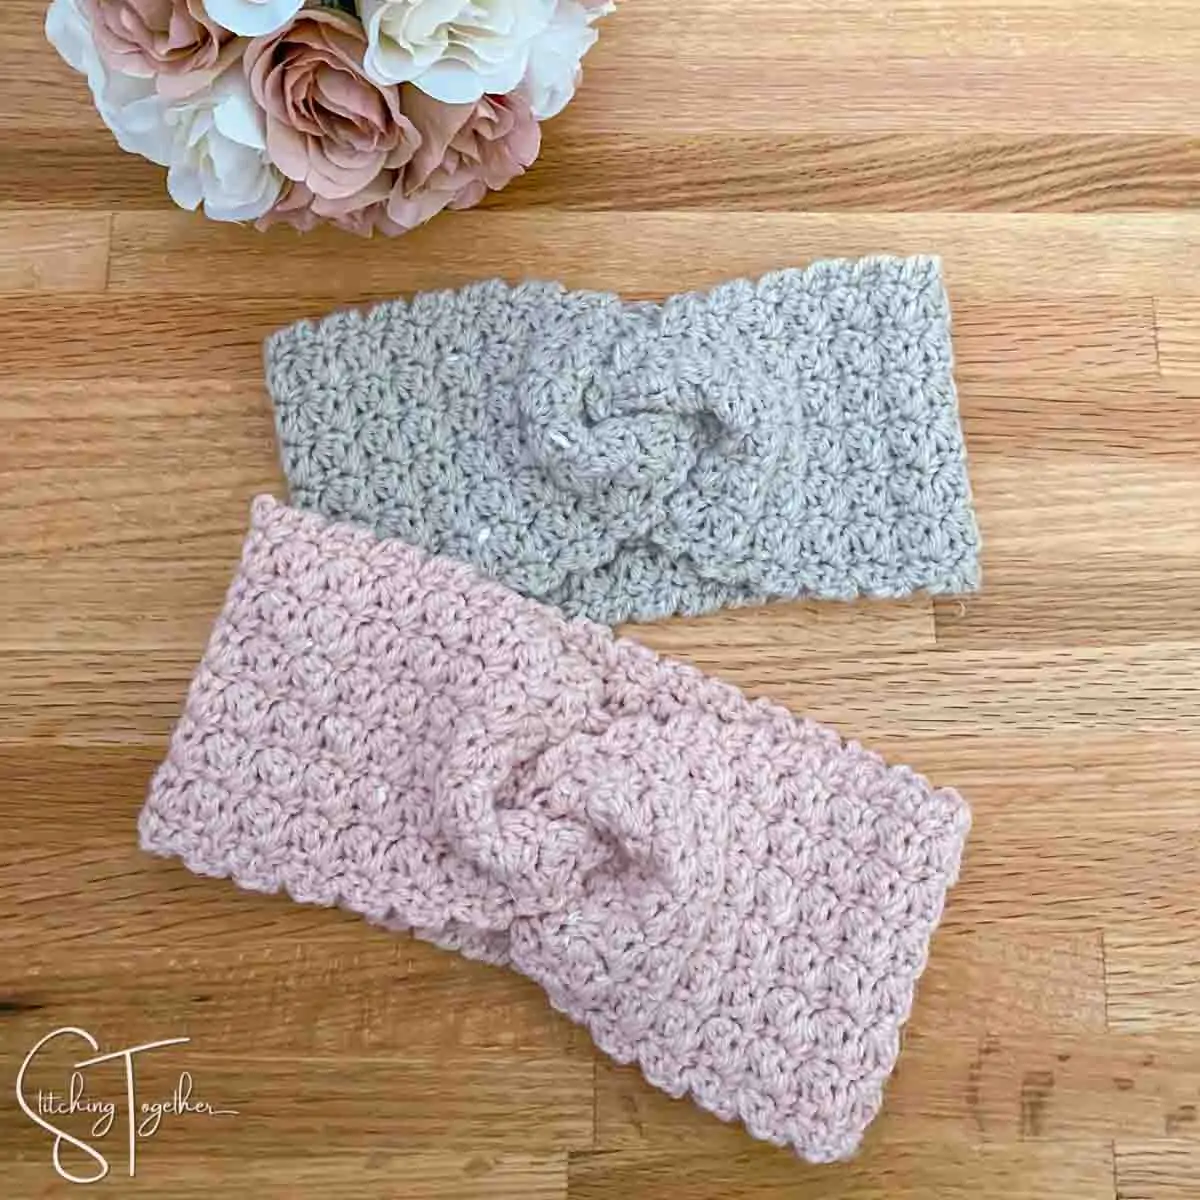 two twist crochet ear warmers laying flat next to a bouquet of roses